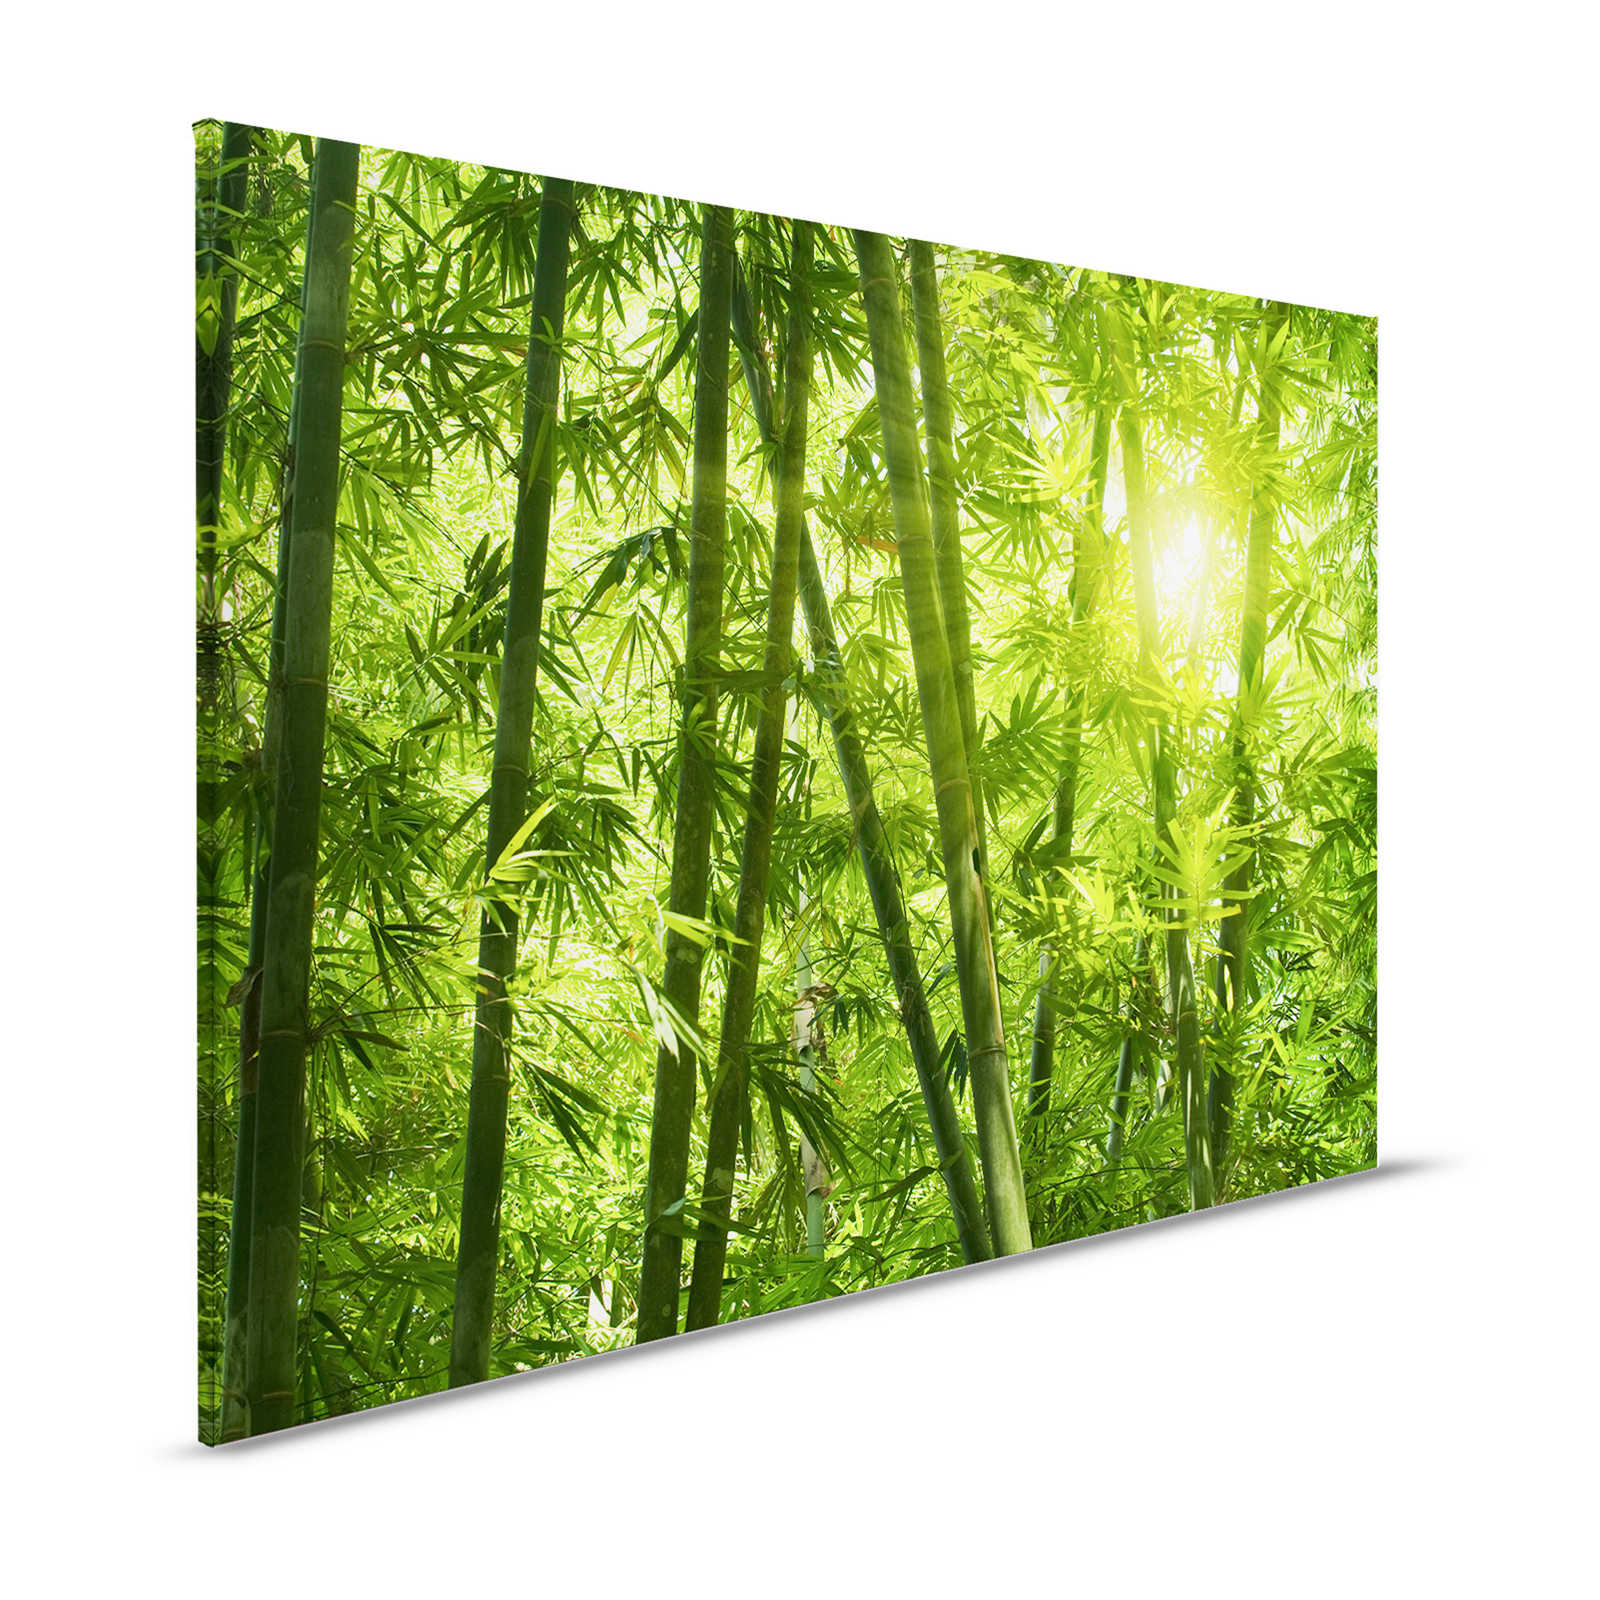 Canvas painting Bamboo and Leaves - 1.20 m x 0.80 m
